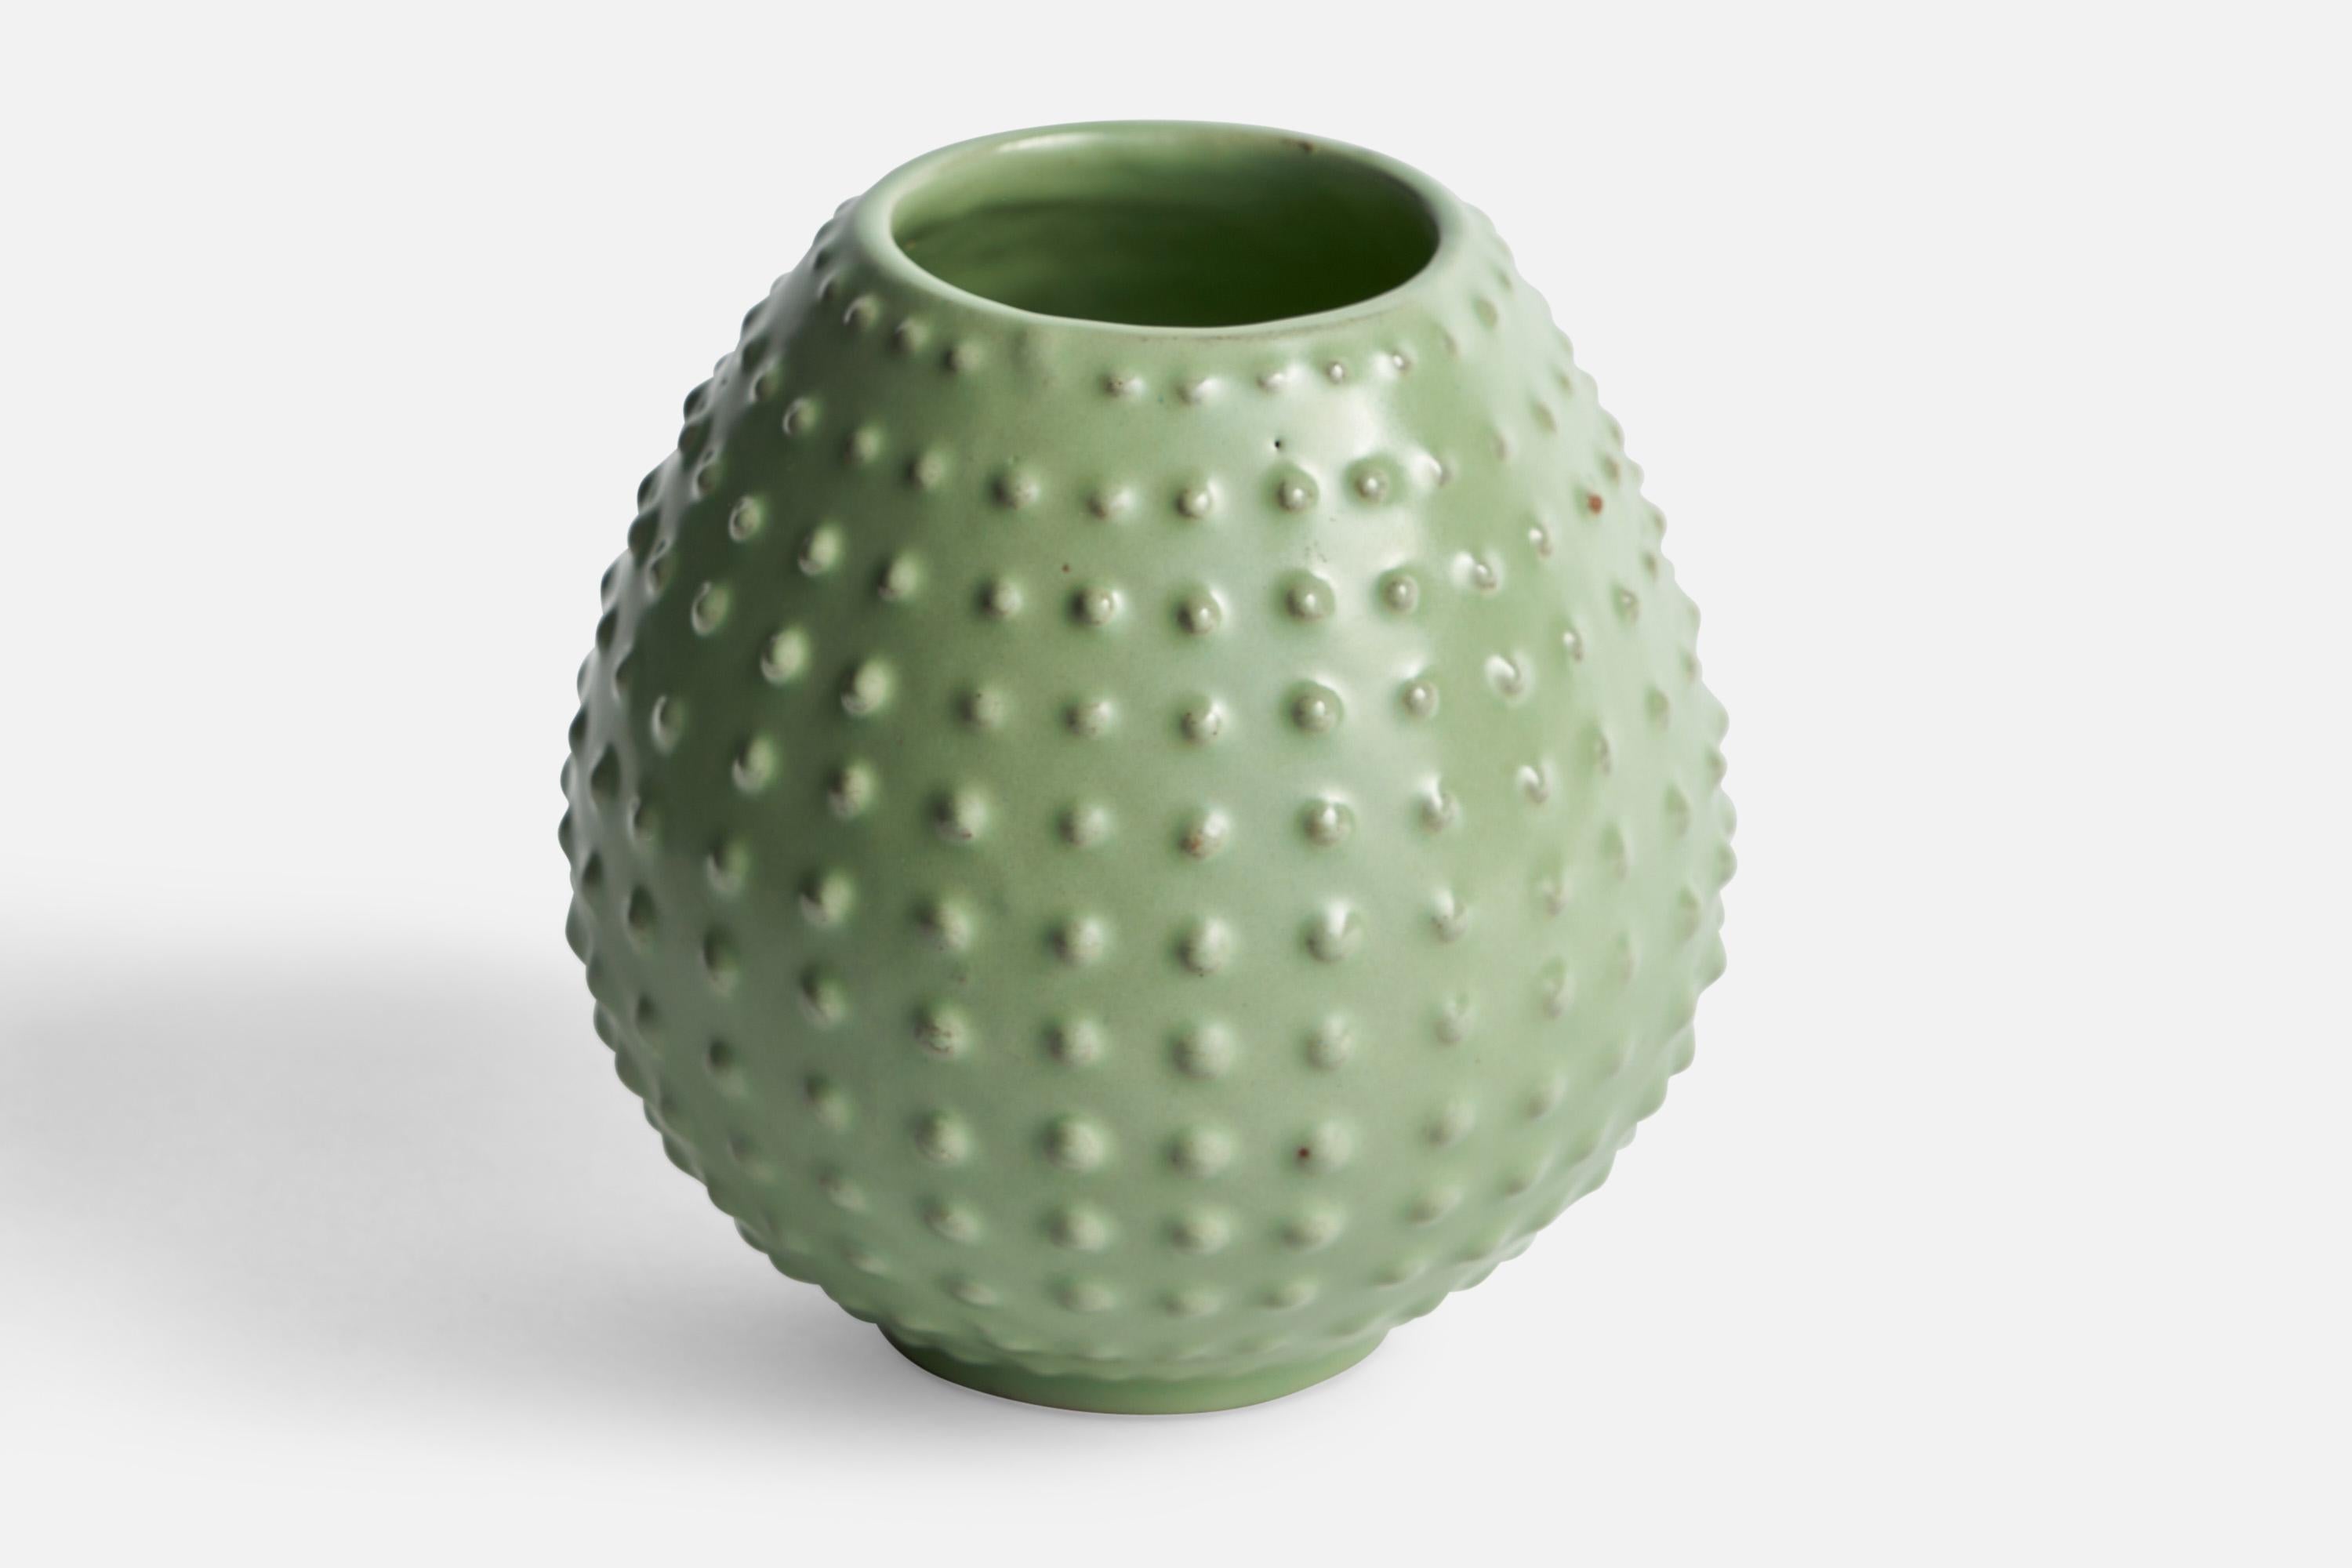 A green-glazed earthenware vase designed by Mari Simmulson in 1951 and produced by Upsala Ekeby, Sweden, 1950s.